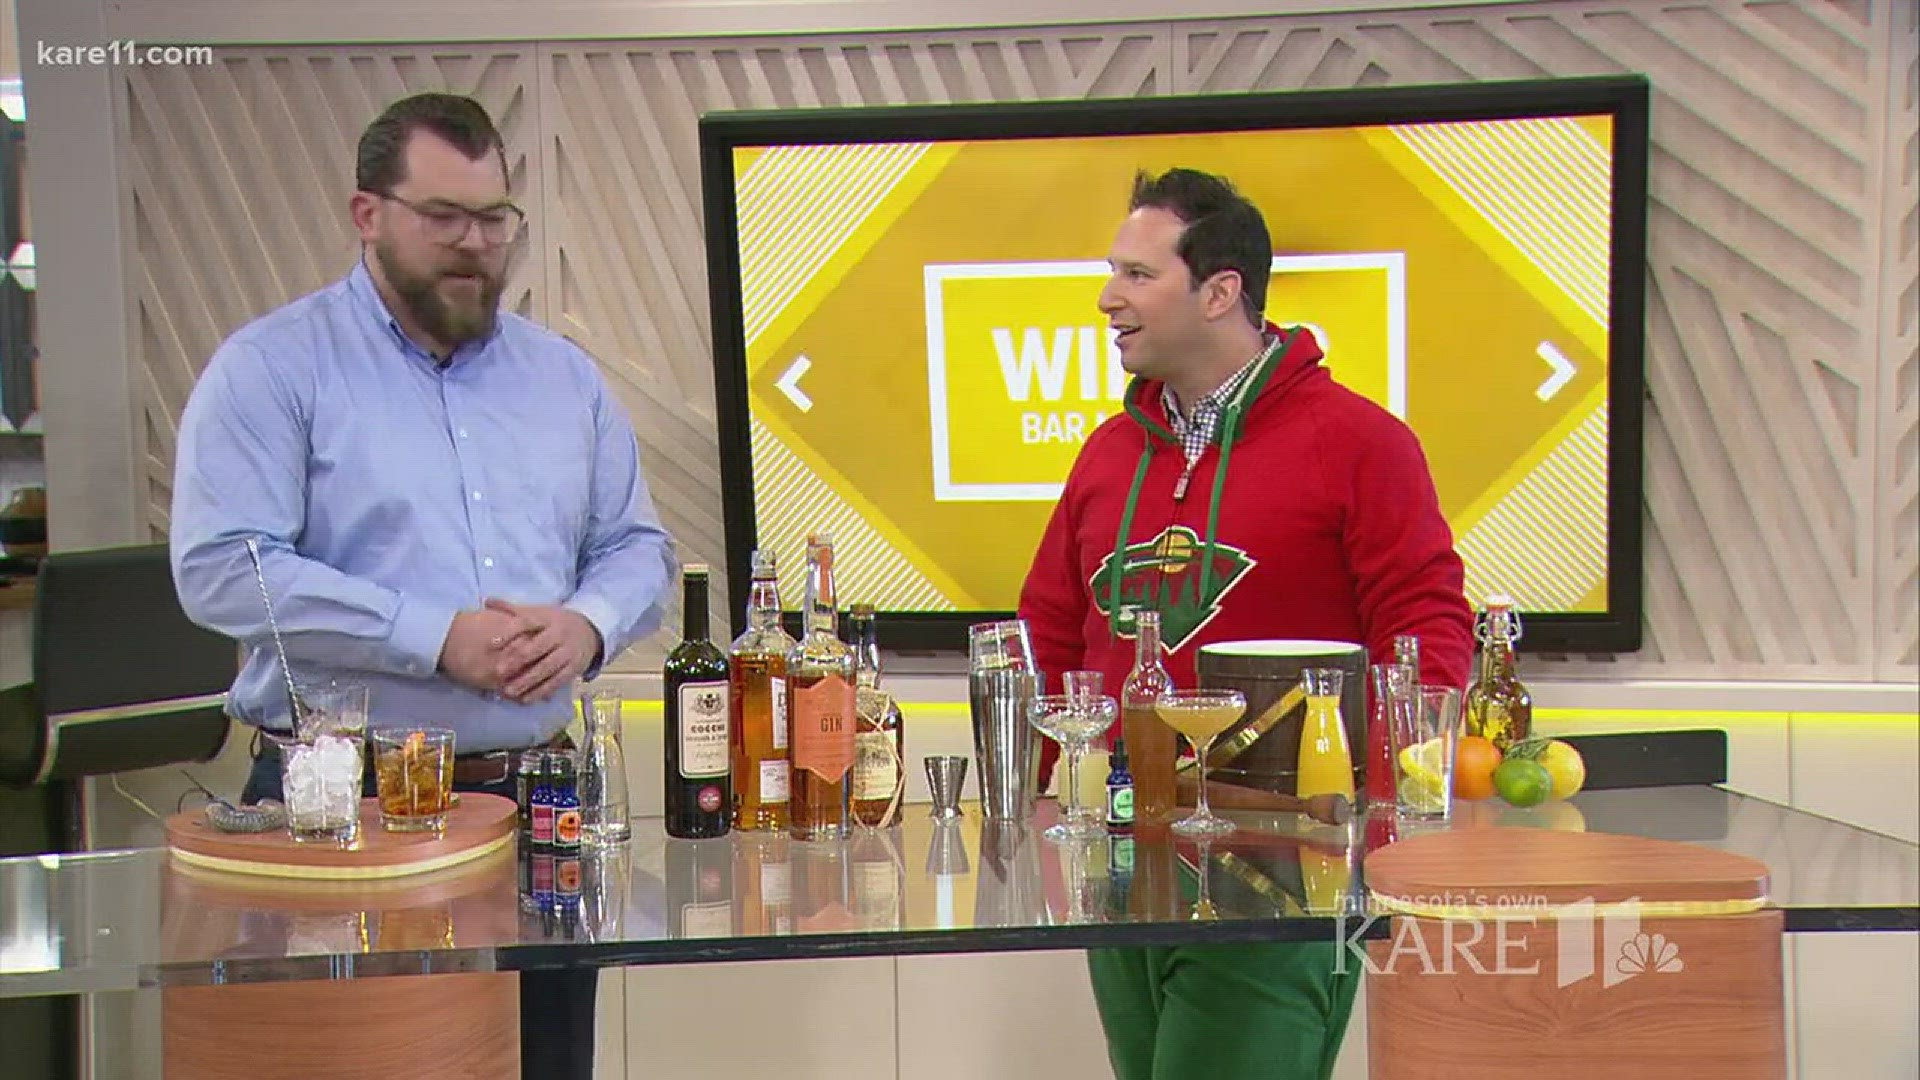 Mike Gharrity, a mixologist from The Exchange/Alibi, shares what staples to keep in your liquor cabinet for quick drinks to make during the holidays.